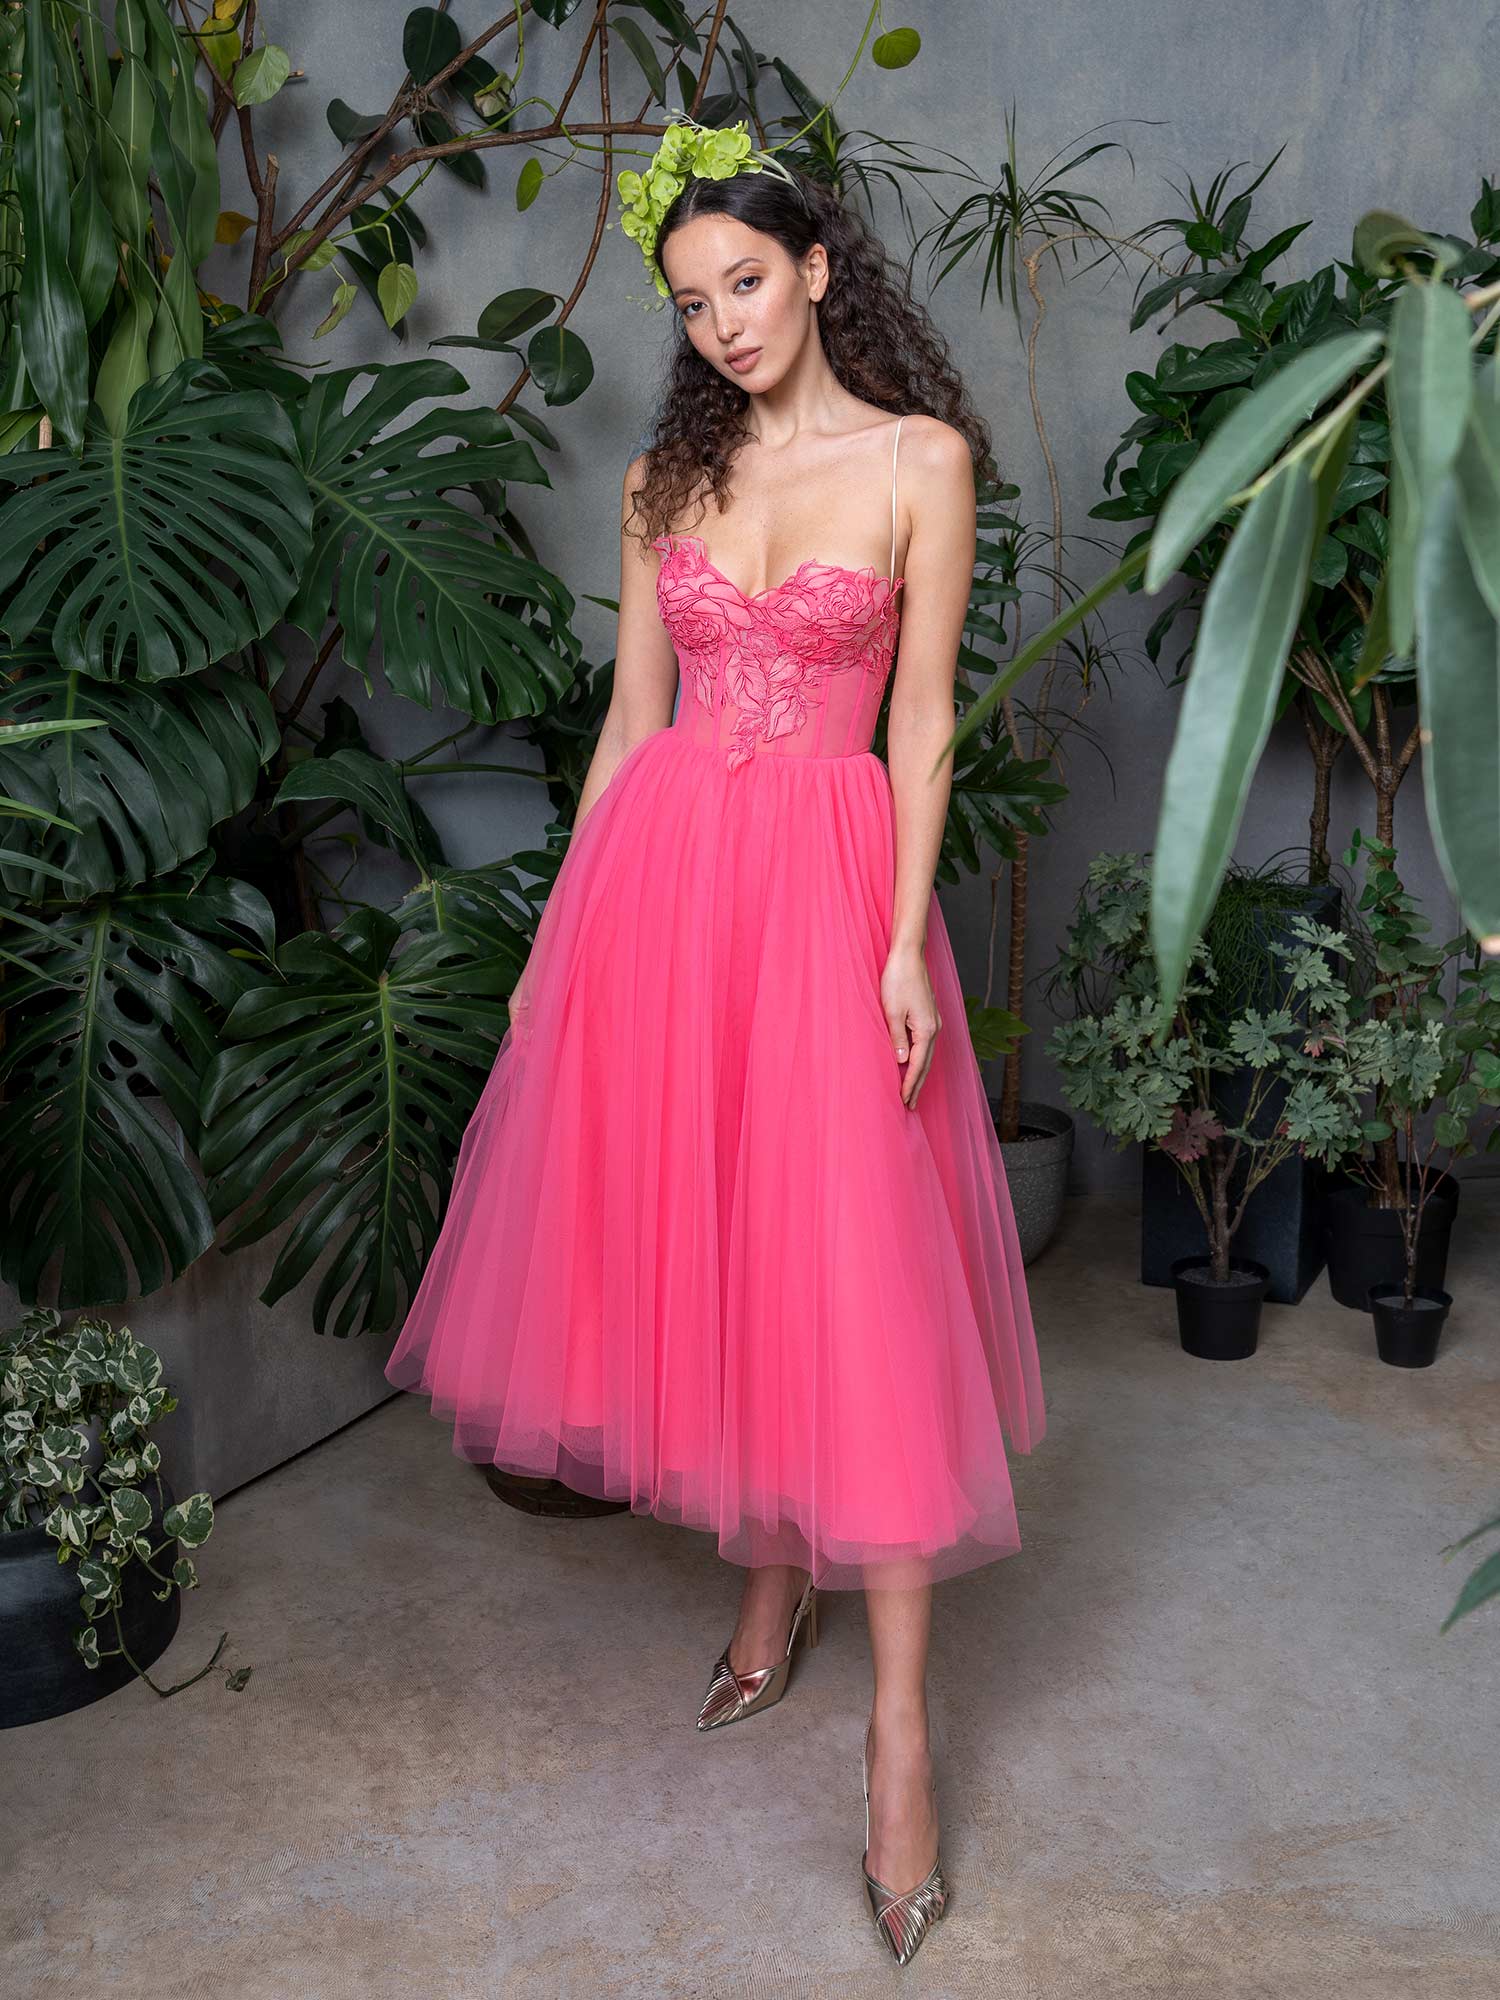 Style #721a, spaghetti strap tea-length ball gown with a floral bodice and tulle skirt; available in midi or maxi length; in powder, watermelon, black, purple, cherry, azure, pink, grey-blue, light-pink, ivory